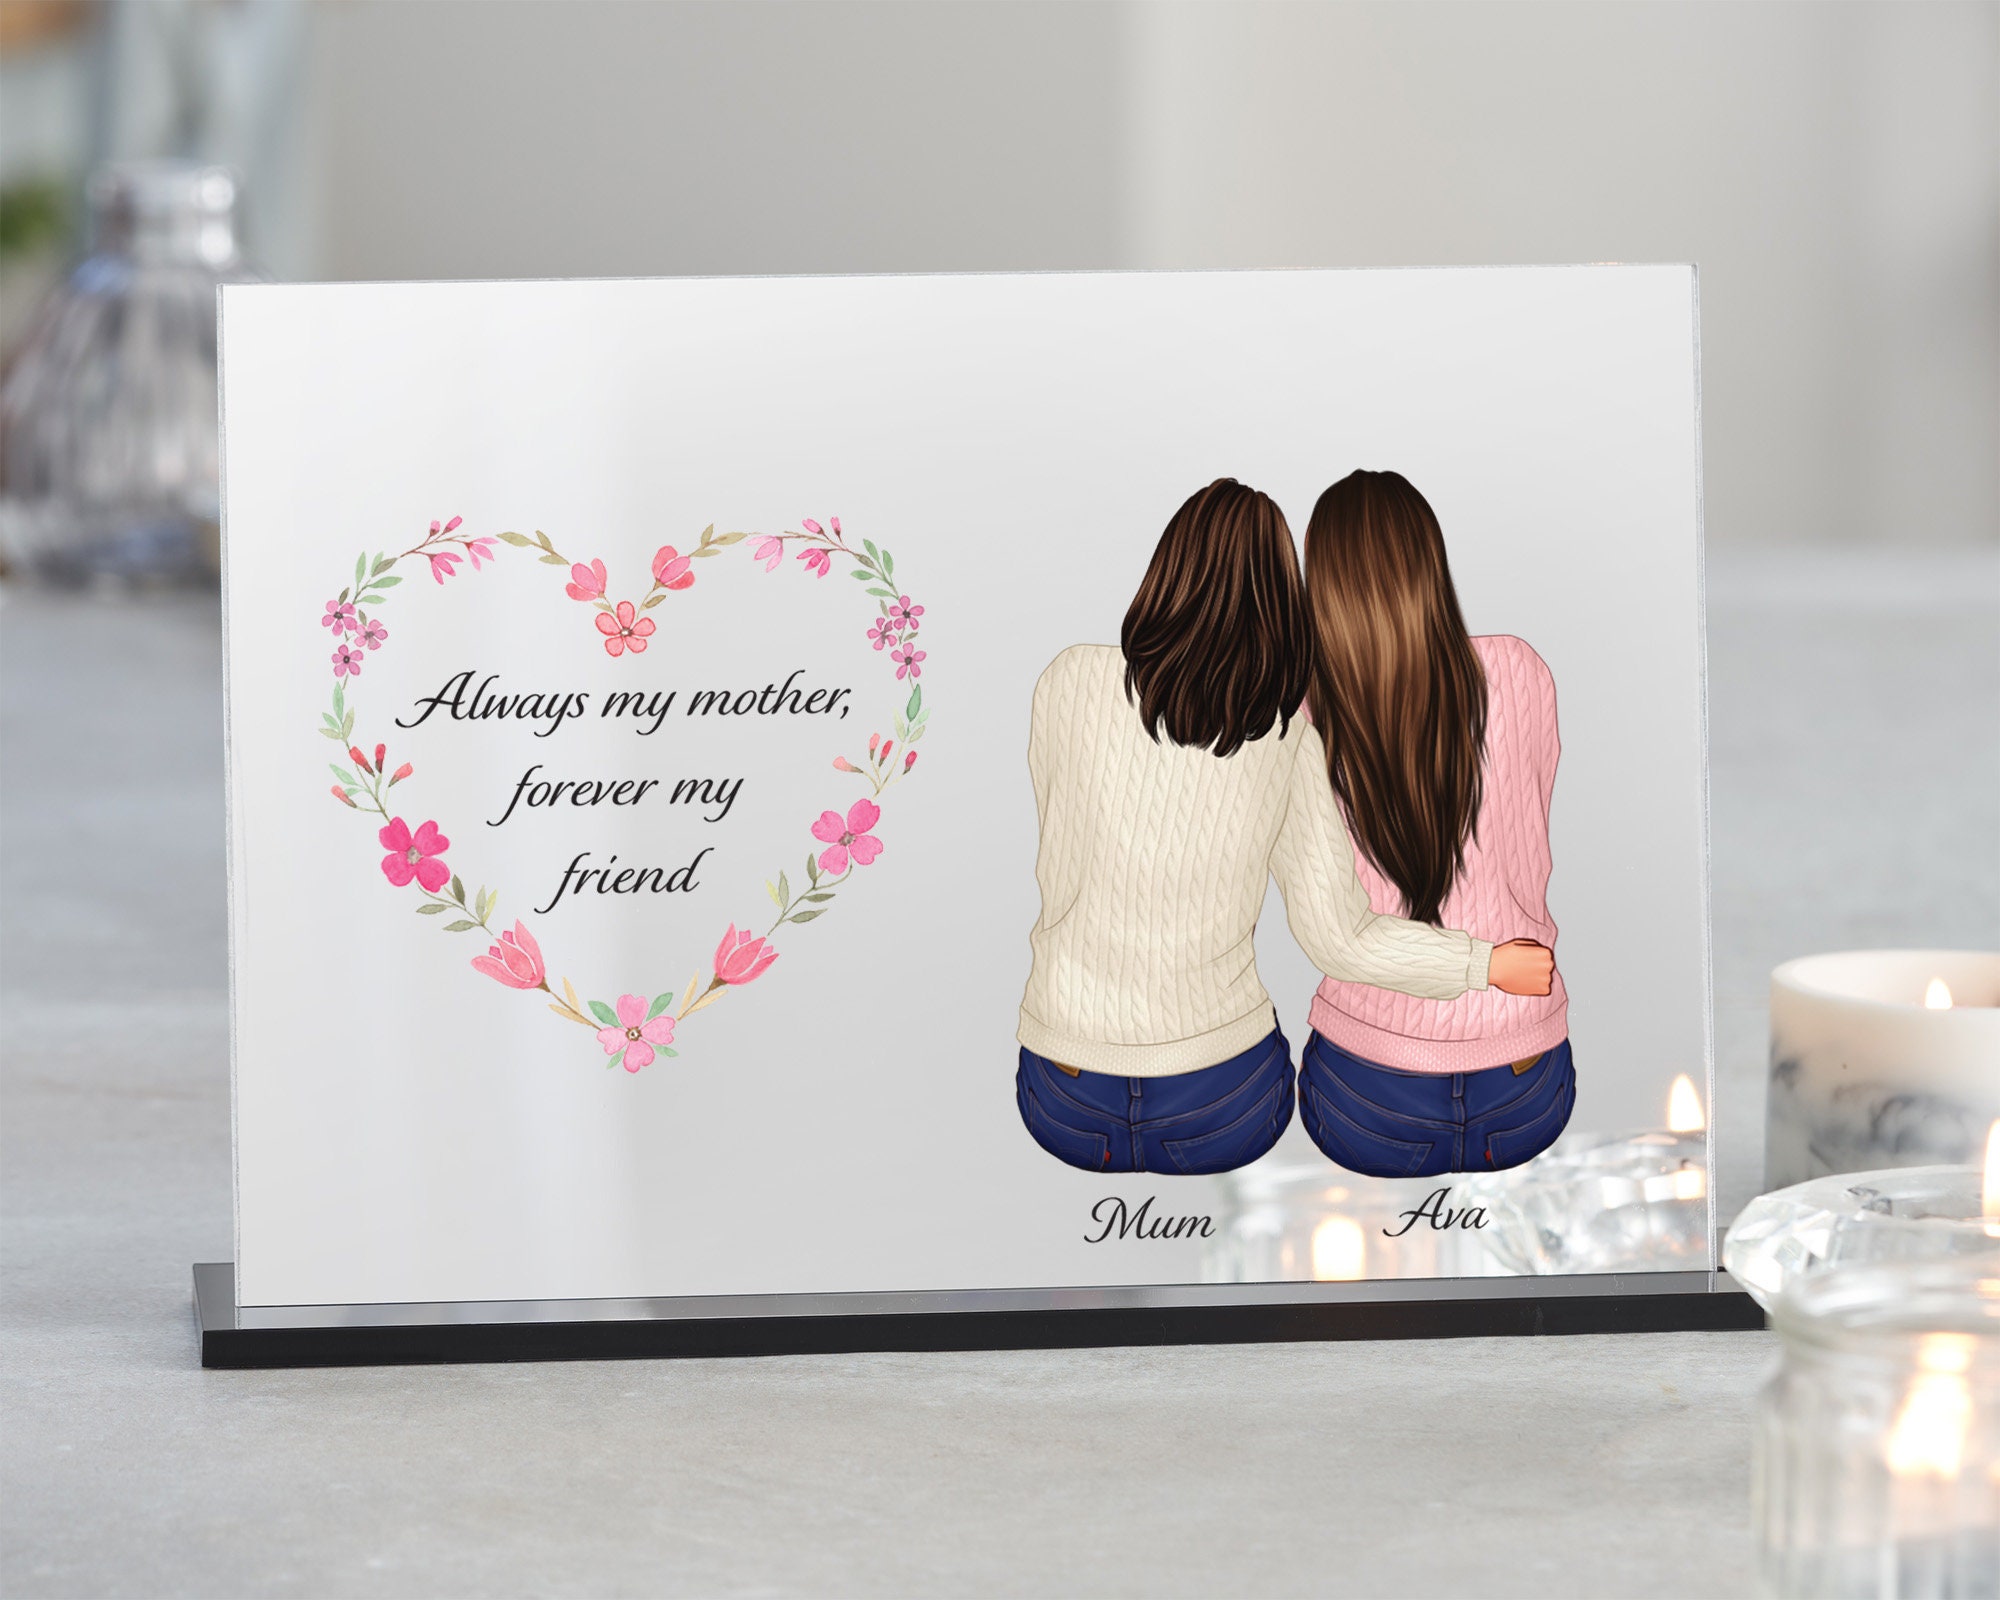 You Look Blooming Lovely Mirrored Jewellery Box Pick Me up 